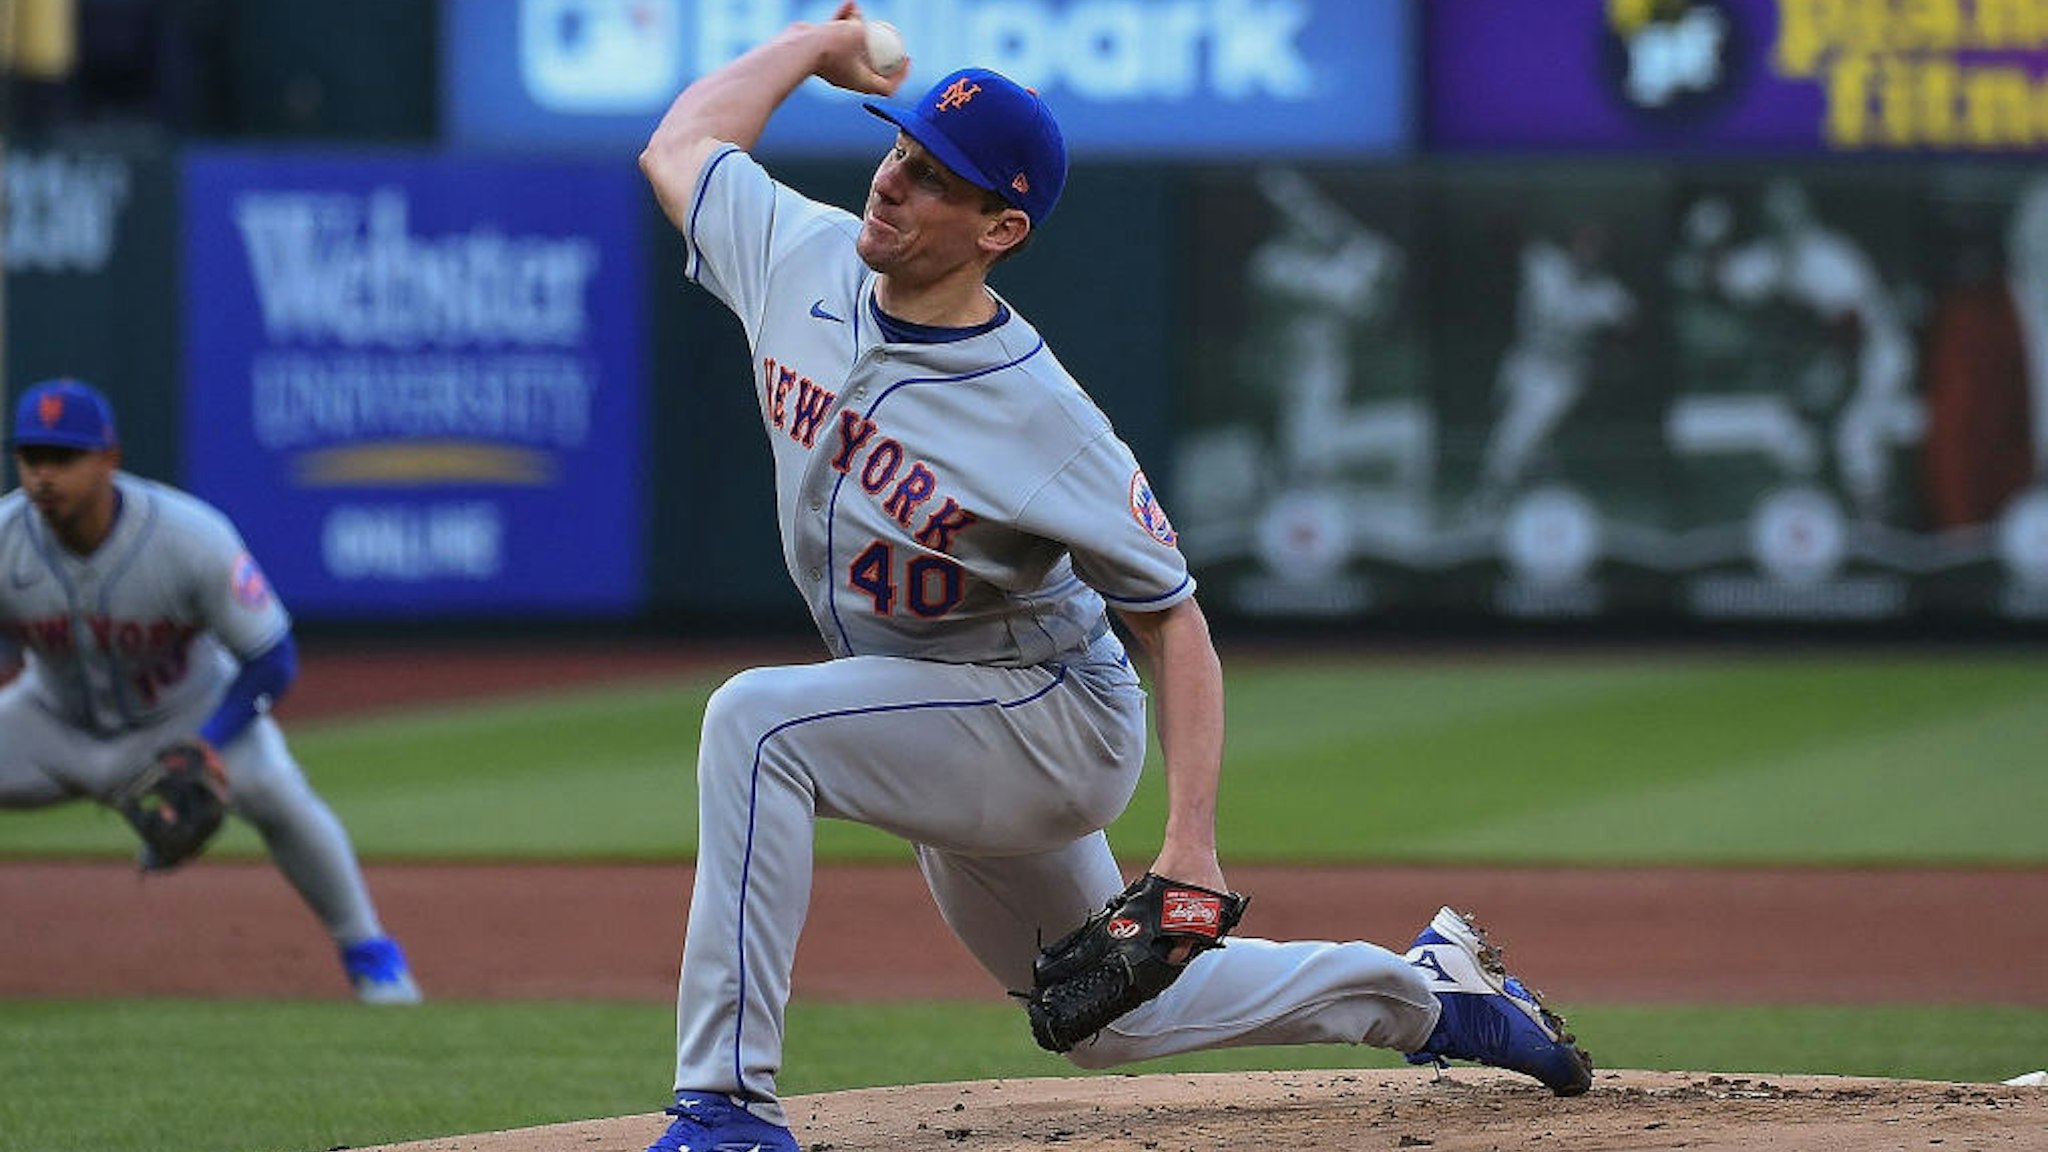 ST LOUIS, MO - APRIL 26: Chris Bassitt #40 of the New York Mets pitches against the St. Louis Cardinals during the first inning at Busch Stadium on April 26, 2022 in St Louis, Missouri. (Photo by Joe Puetz/Getty Images) *** Local Caption ***